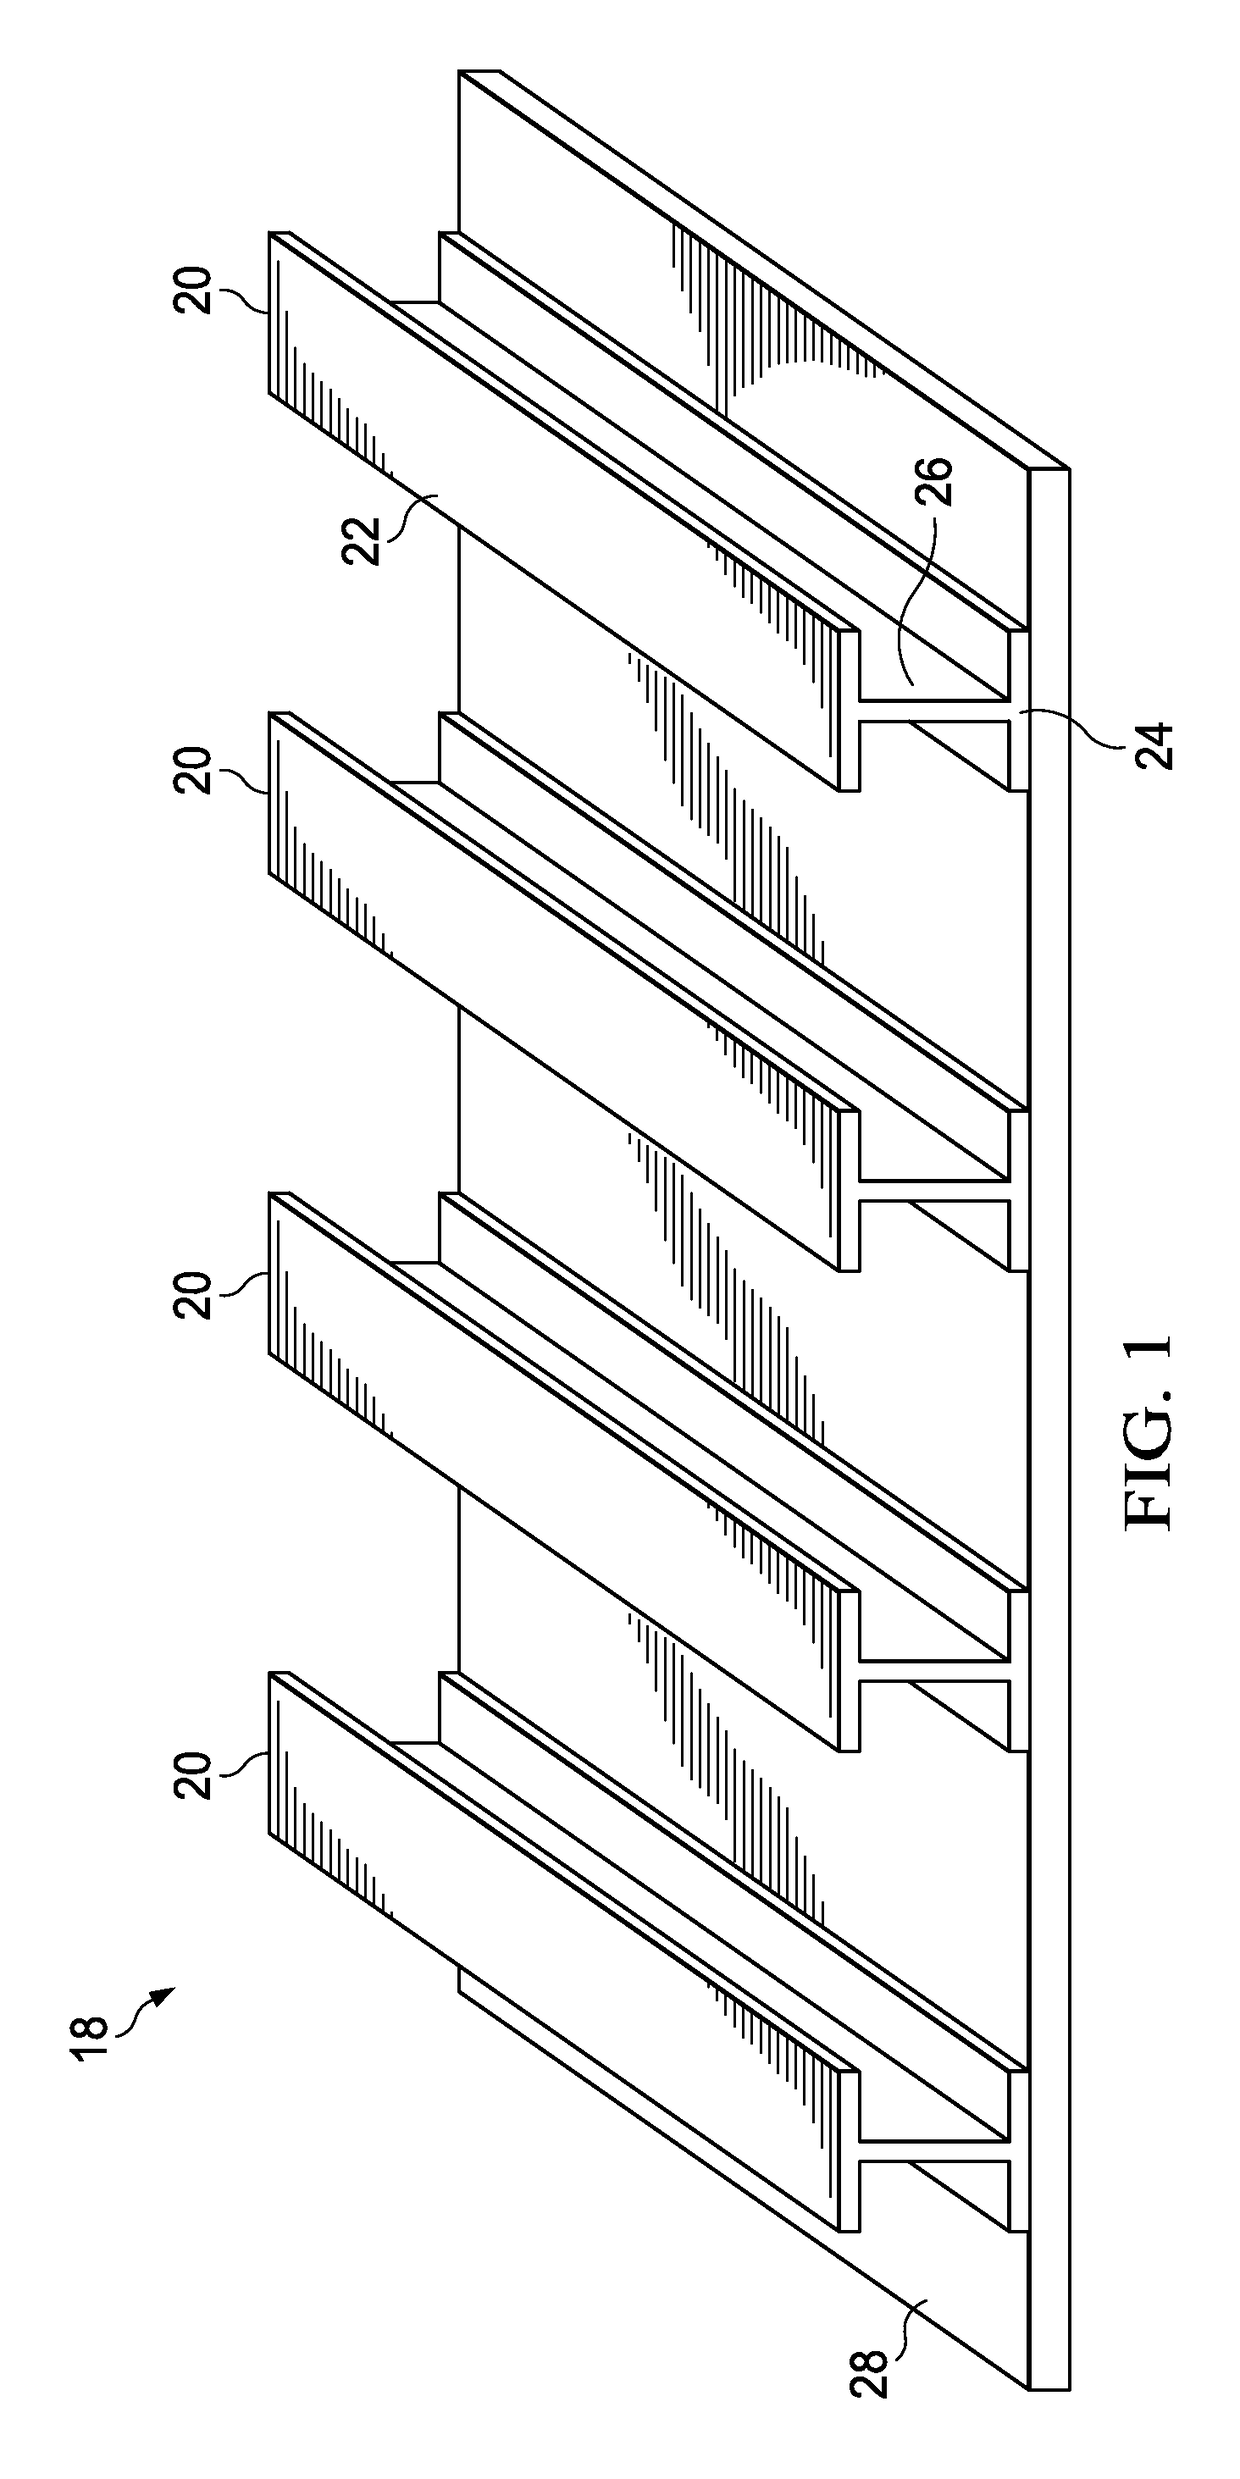 Vacuum bag processing of composite parts using a conformable vacuum bag assembly